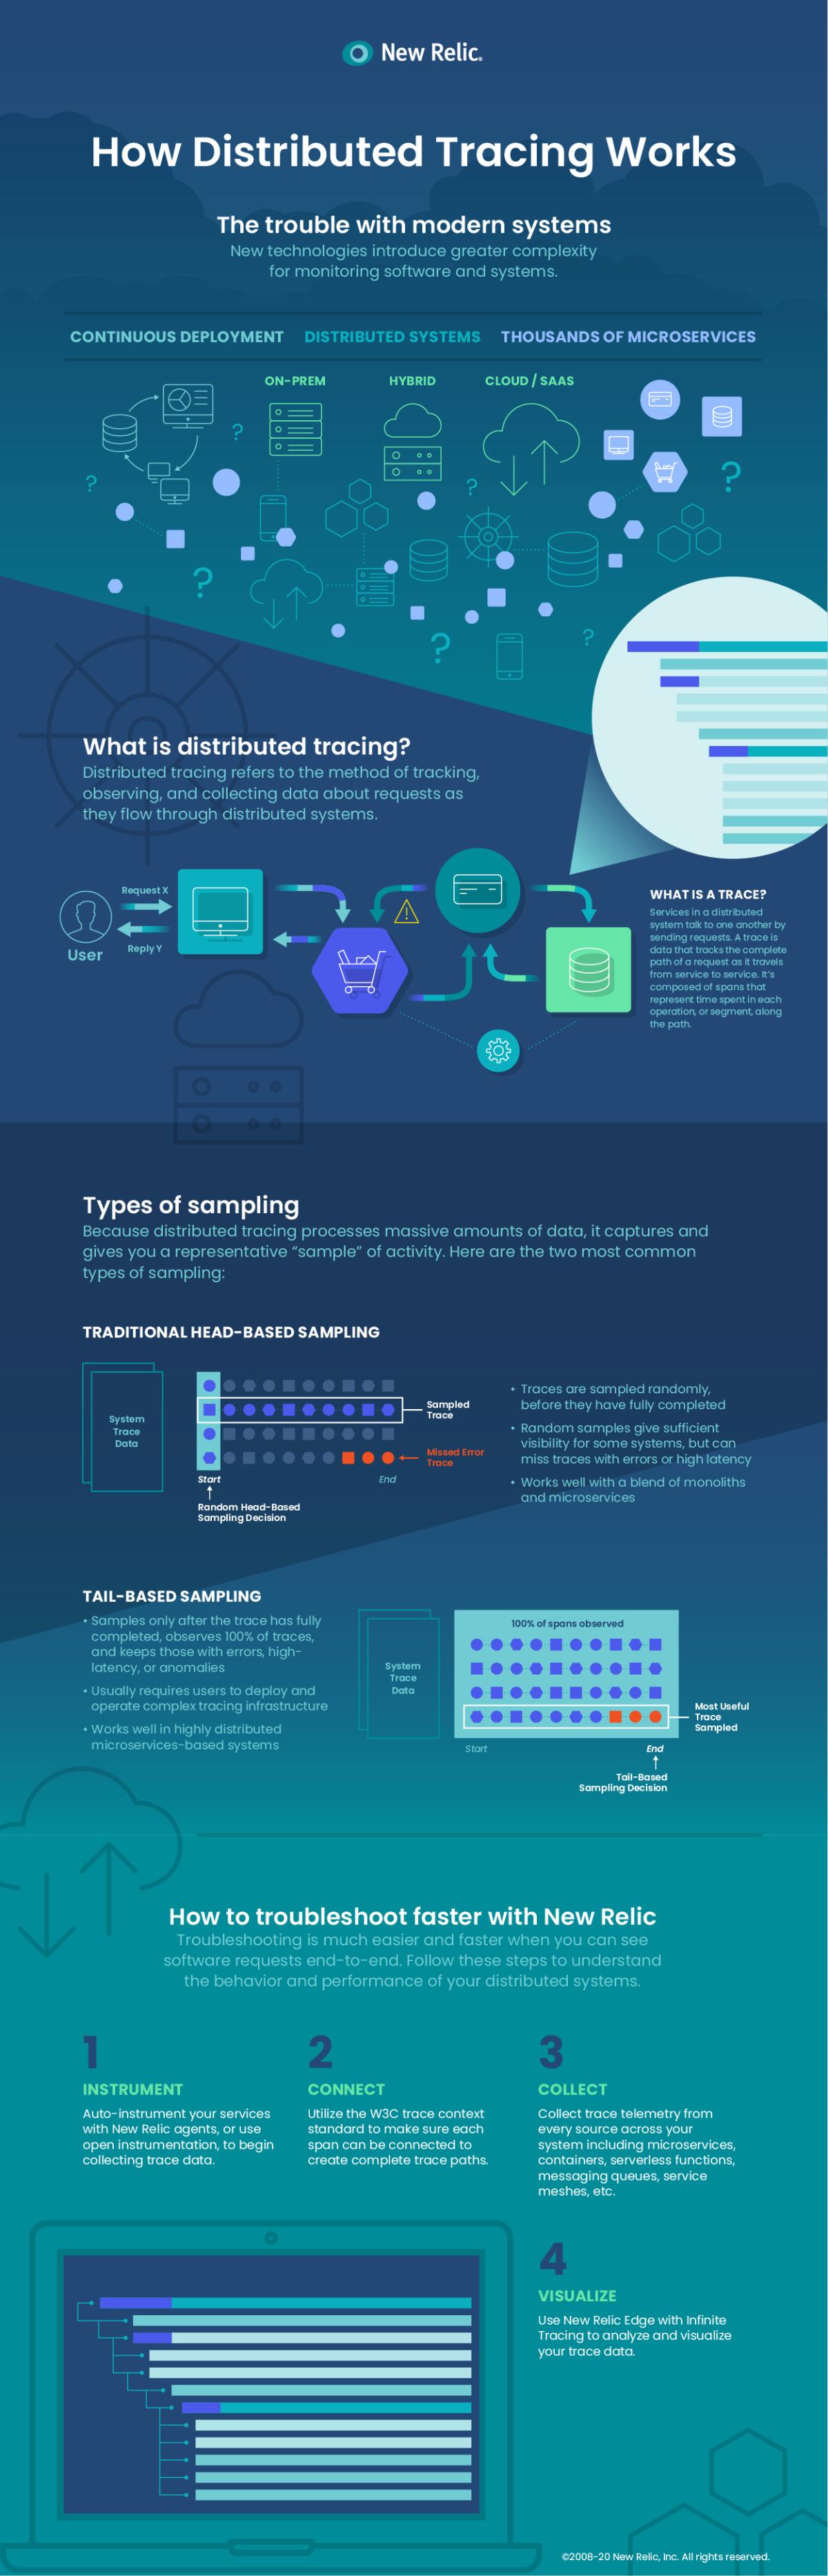 Infographic - How Distributed Tracing Works